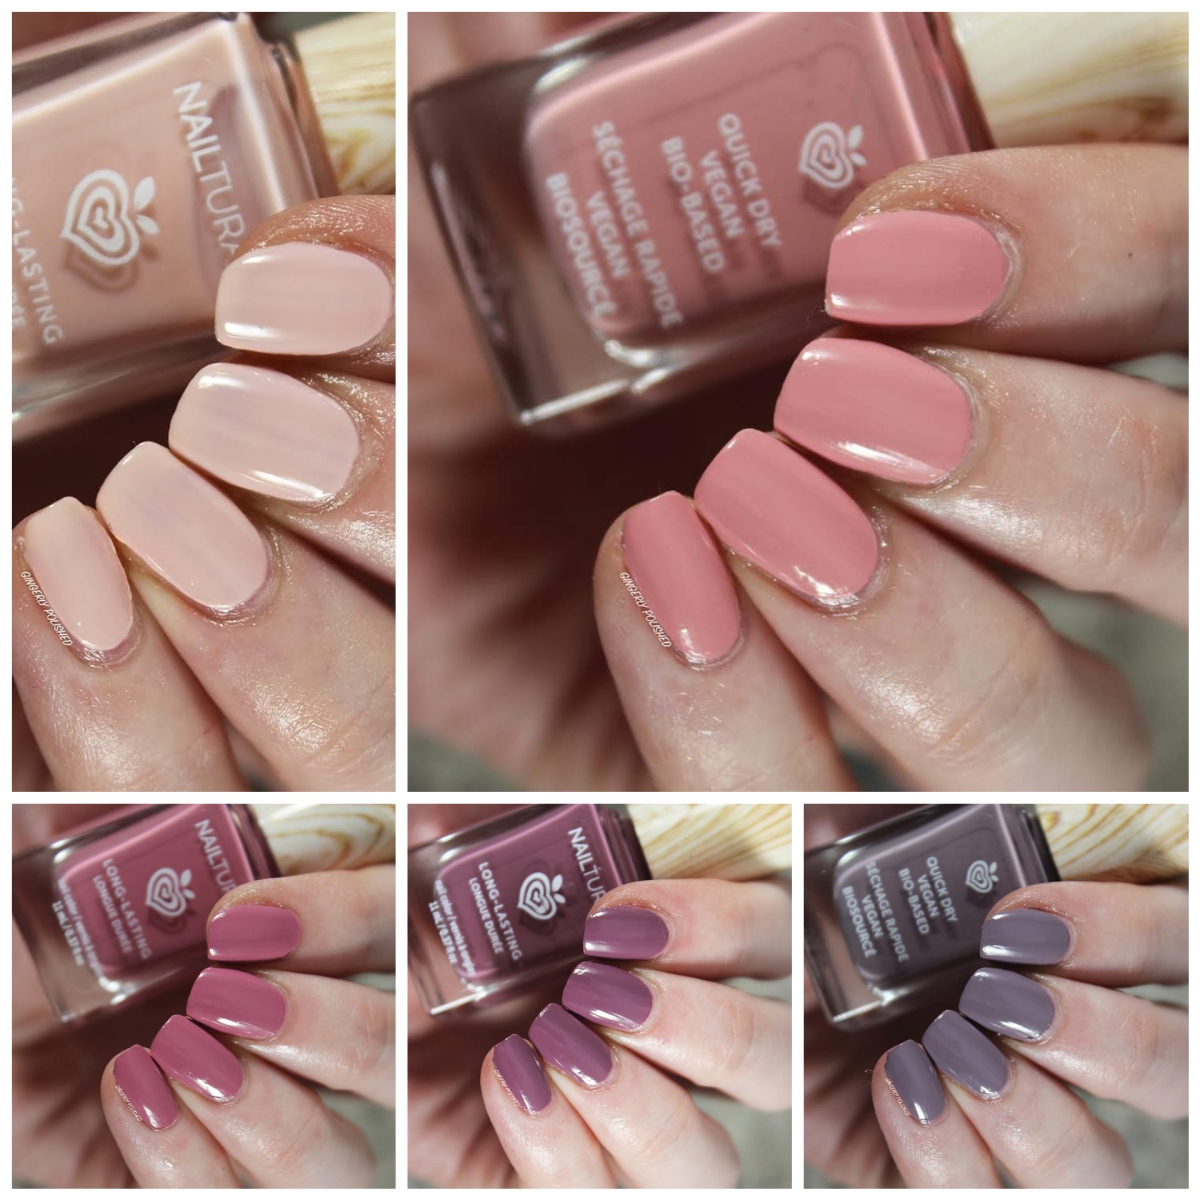 Vortrefflich Nailtural Malibu Collection – Review & POLISHED GINGERLY Swatches –